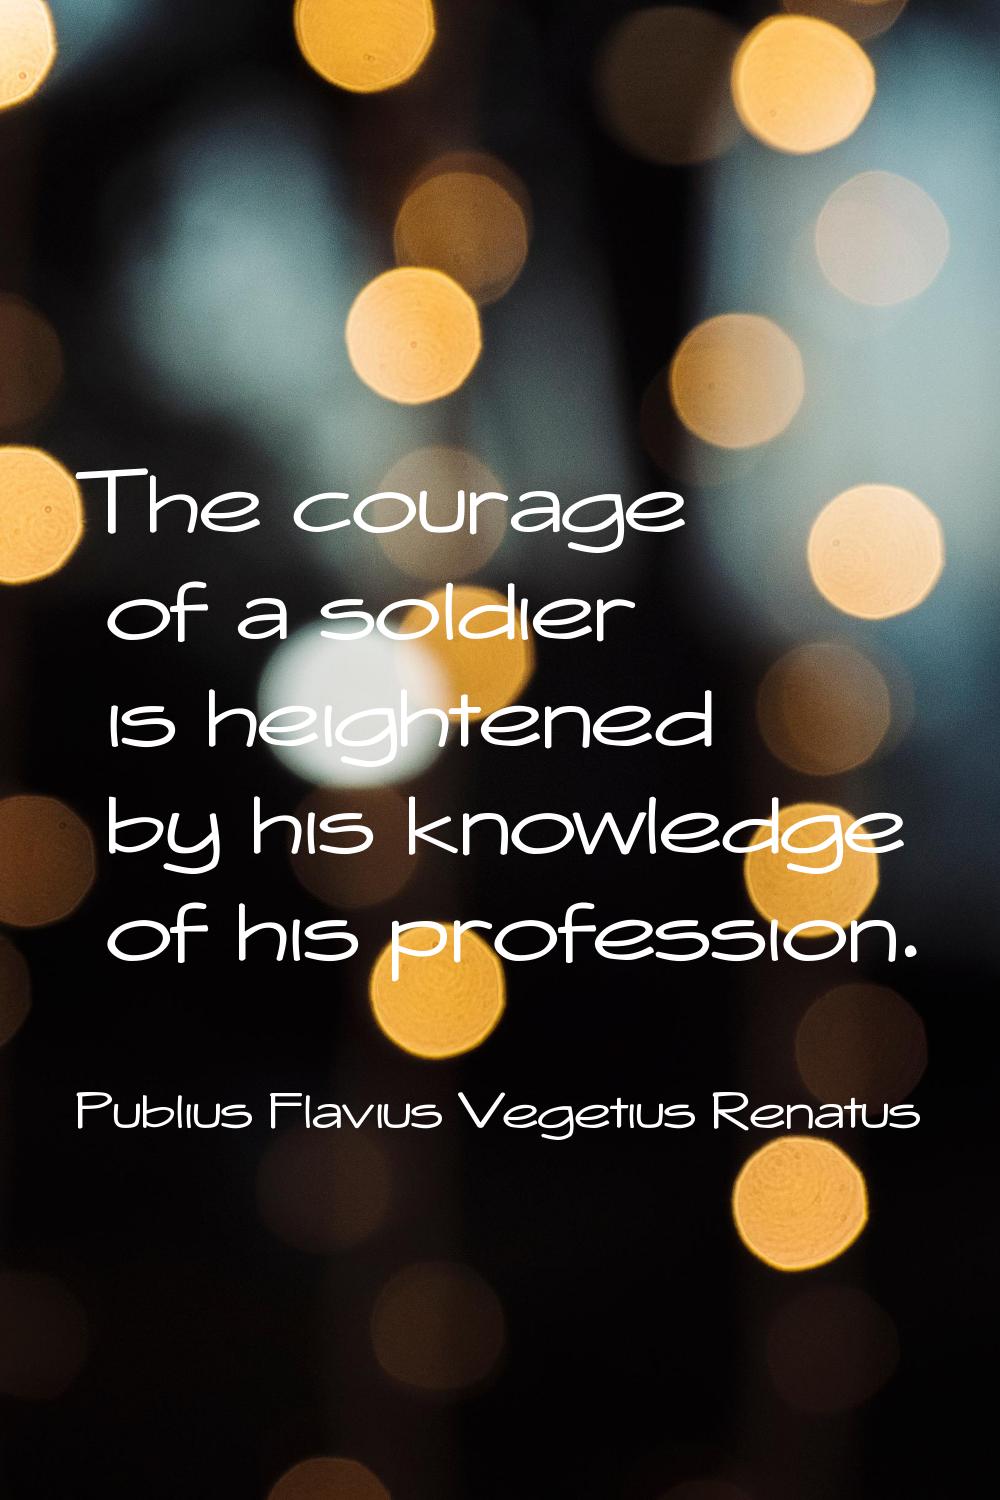 The courage of a soldier is heightened by his knowledge of his profession.